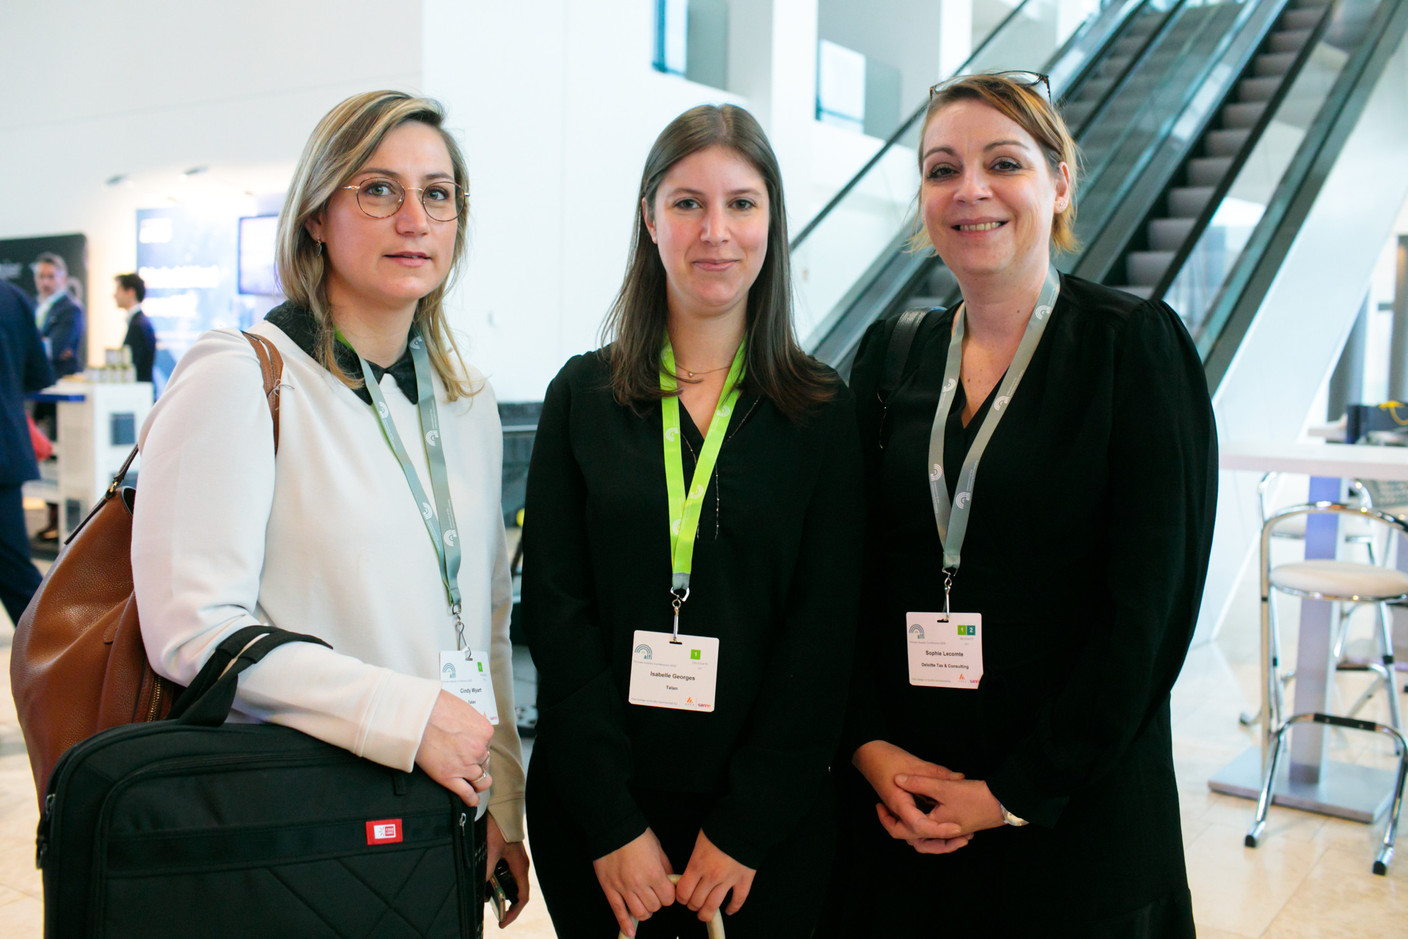 Cindy Wyart of Talan, Isabelle Georges of Talan, and Sophie Lecomte at Deloitte Tax & Consulting. Photo: Matic Zorman / Maison Moderne